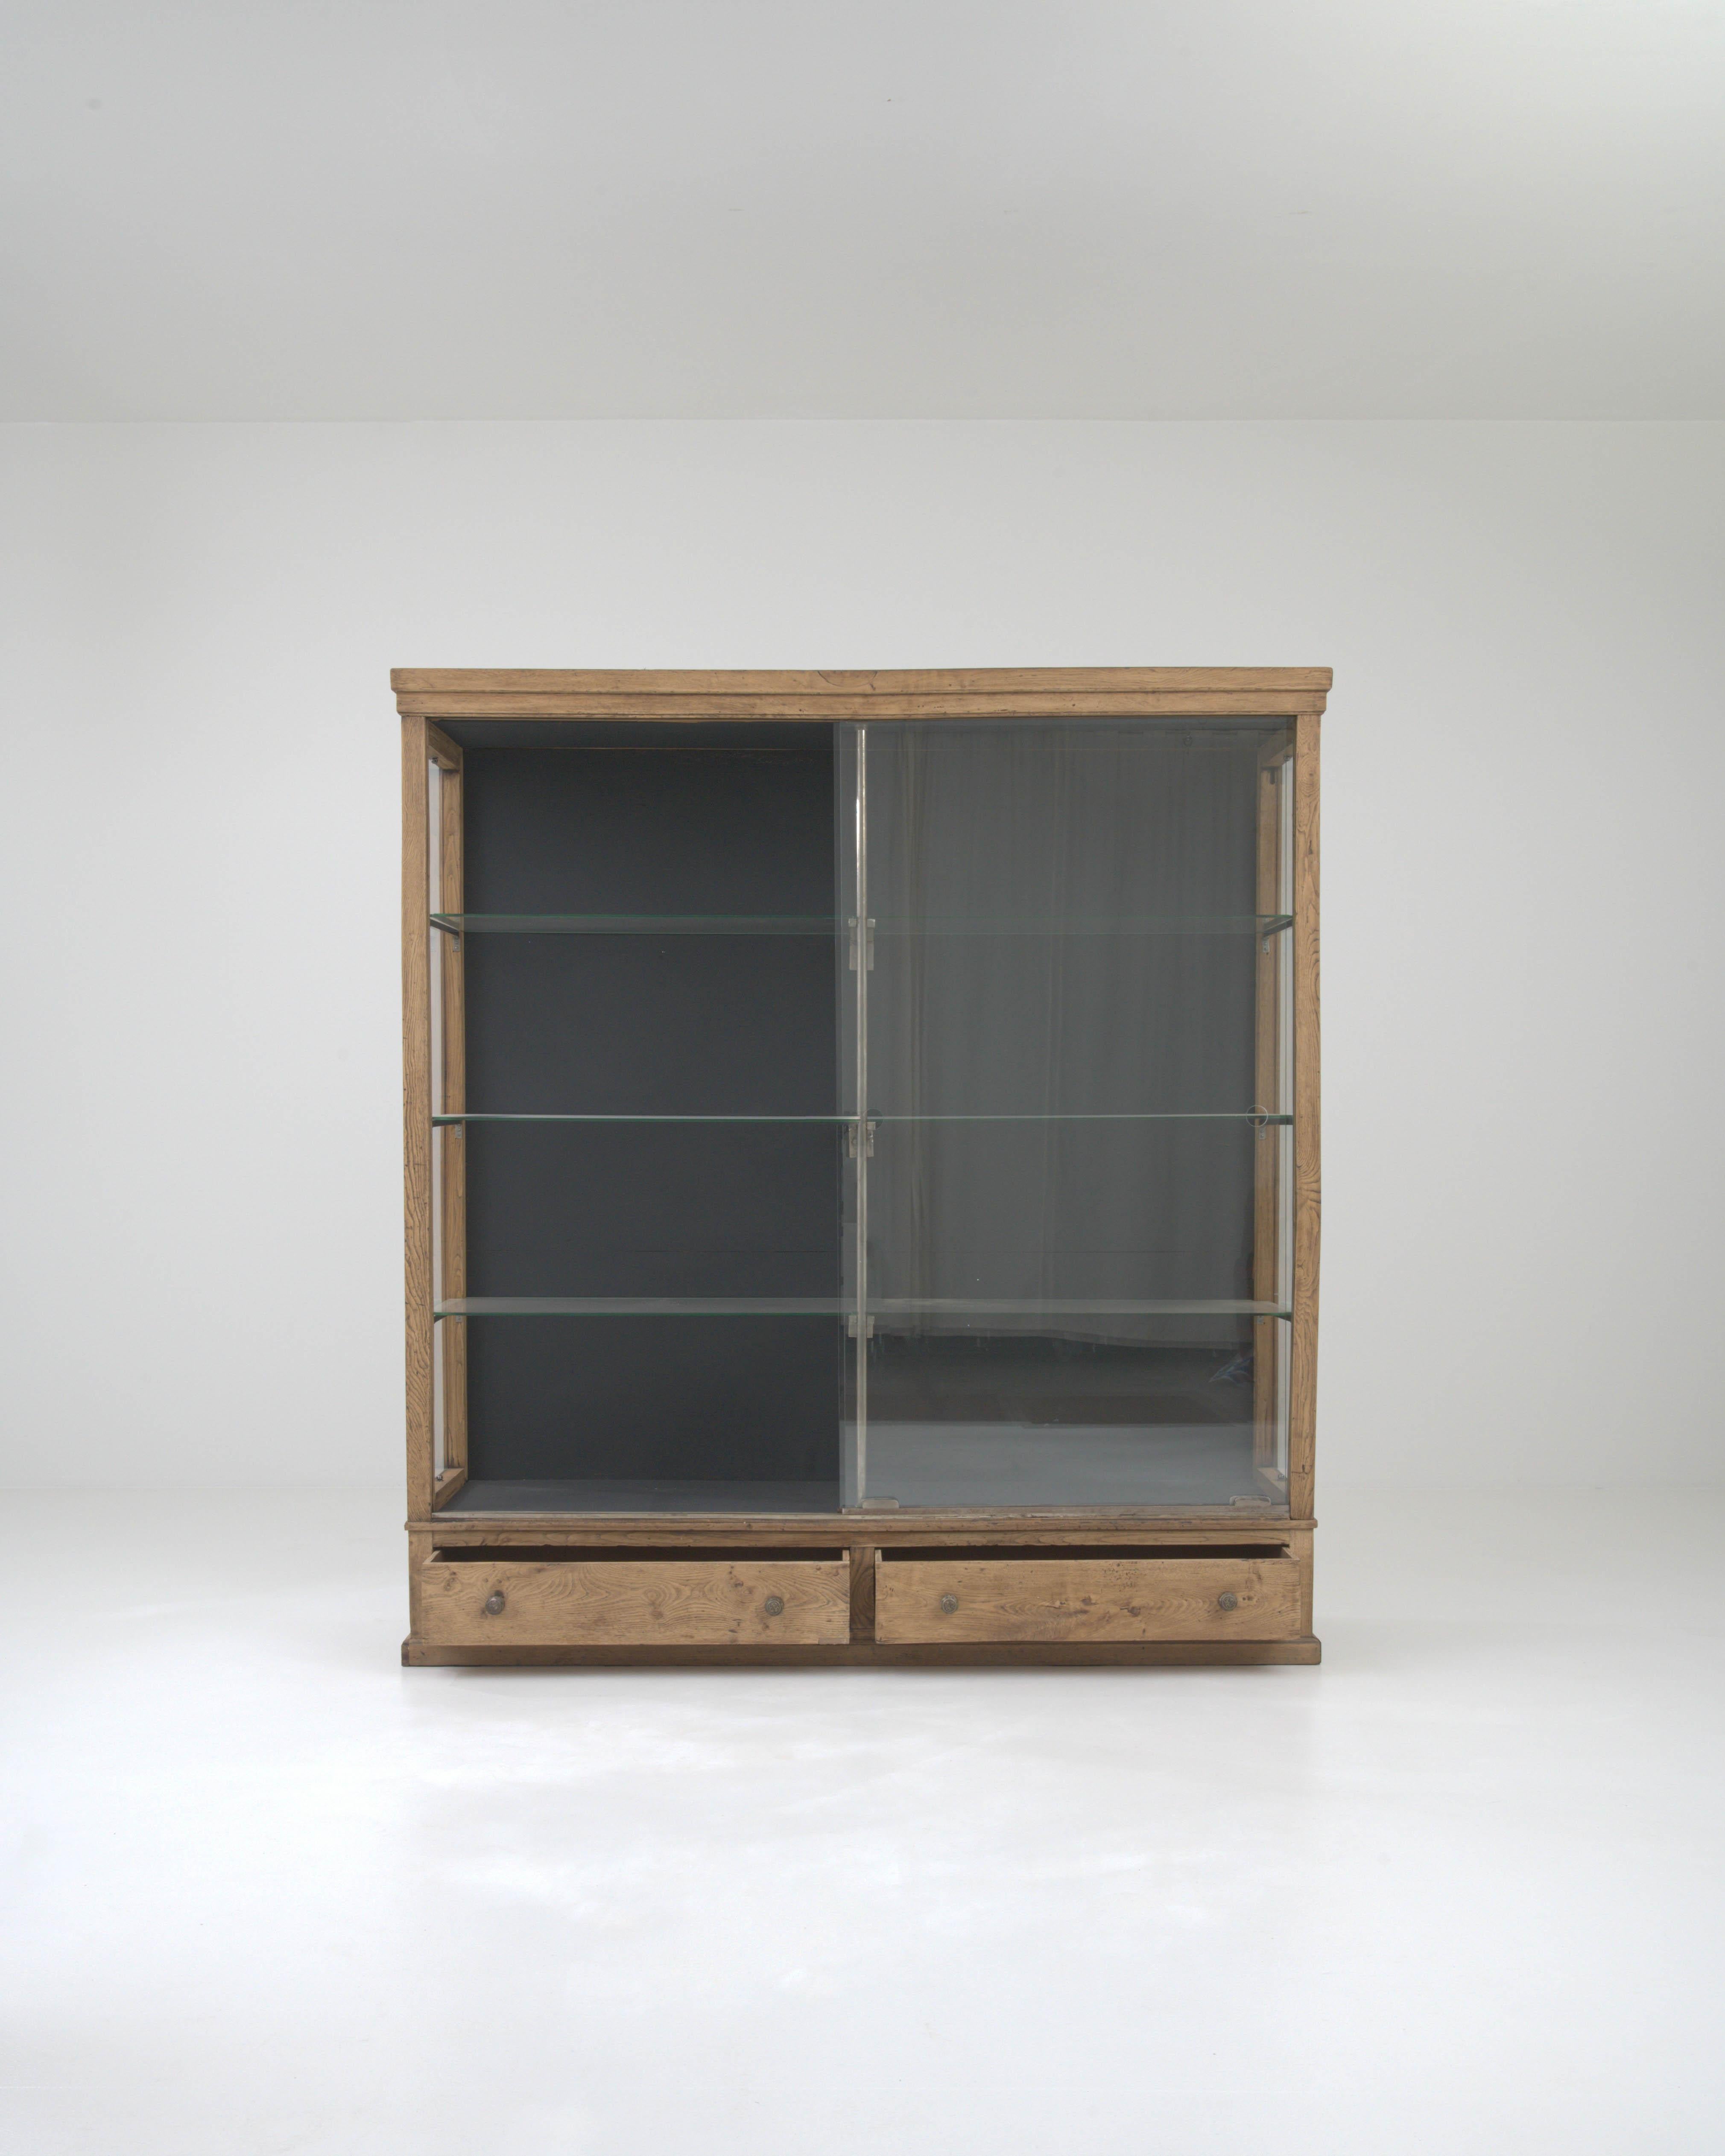 Discover the timeless elegance of the early 1900s with this exquisite French Wooden Vitrine. Crafted with the utmost care, this display cabinet exudes a sense of history and refinement, perfect for the discerning collector or interior design